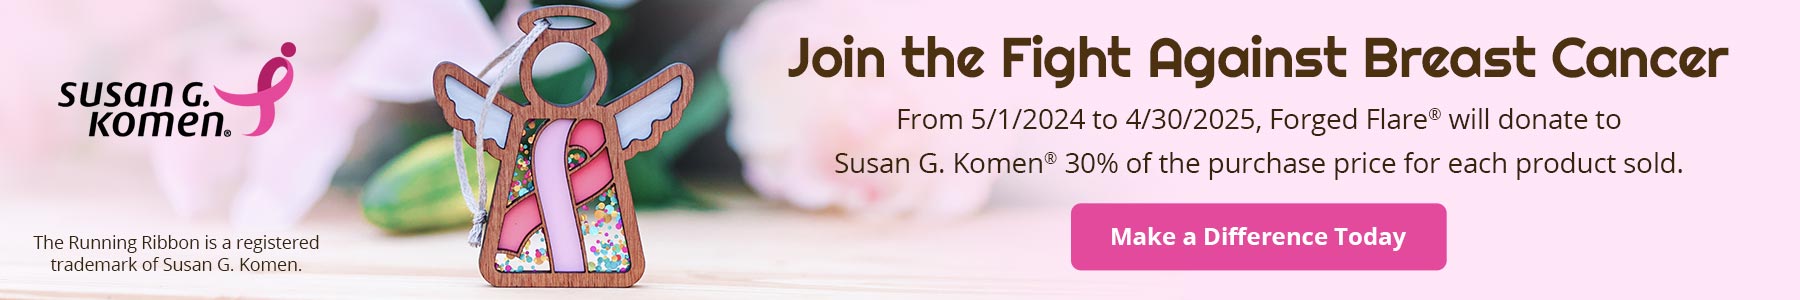 Join the Fight Against Breast Cancer. From 5/1/2024 to 4/30/2025, Forged Flare® will donate to Susan G. Komen® 30% of the purchase price for each product sold. Make a Difference Today. The Running Ribbon is a registered trademark of Susan G. Komen.